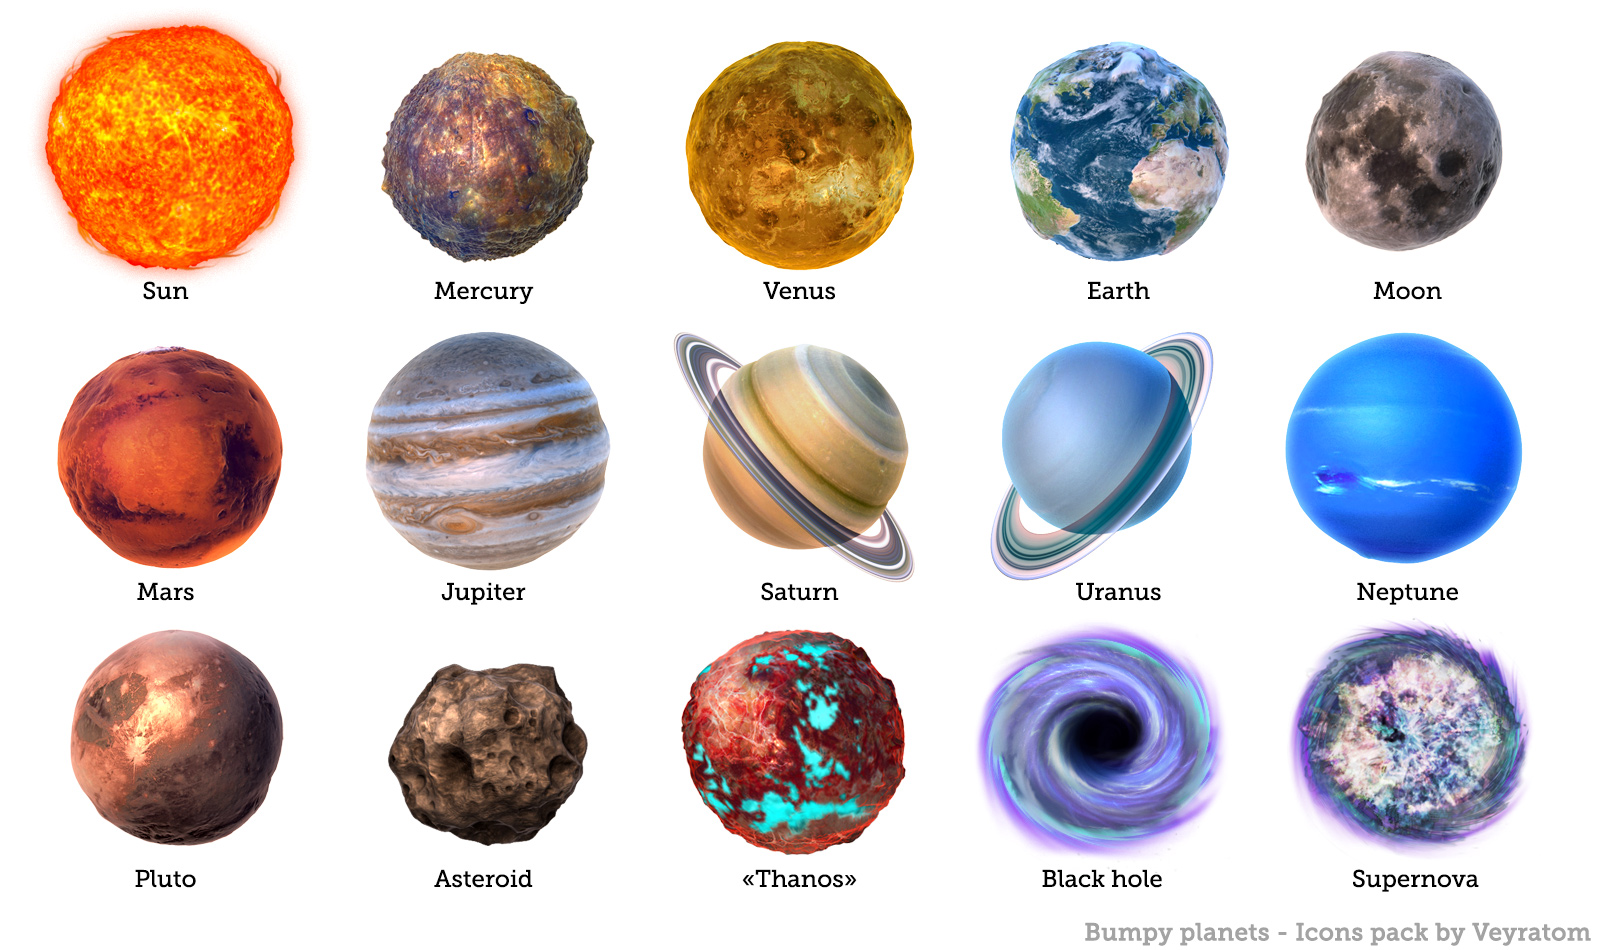 Images of planets